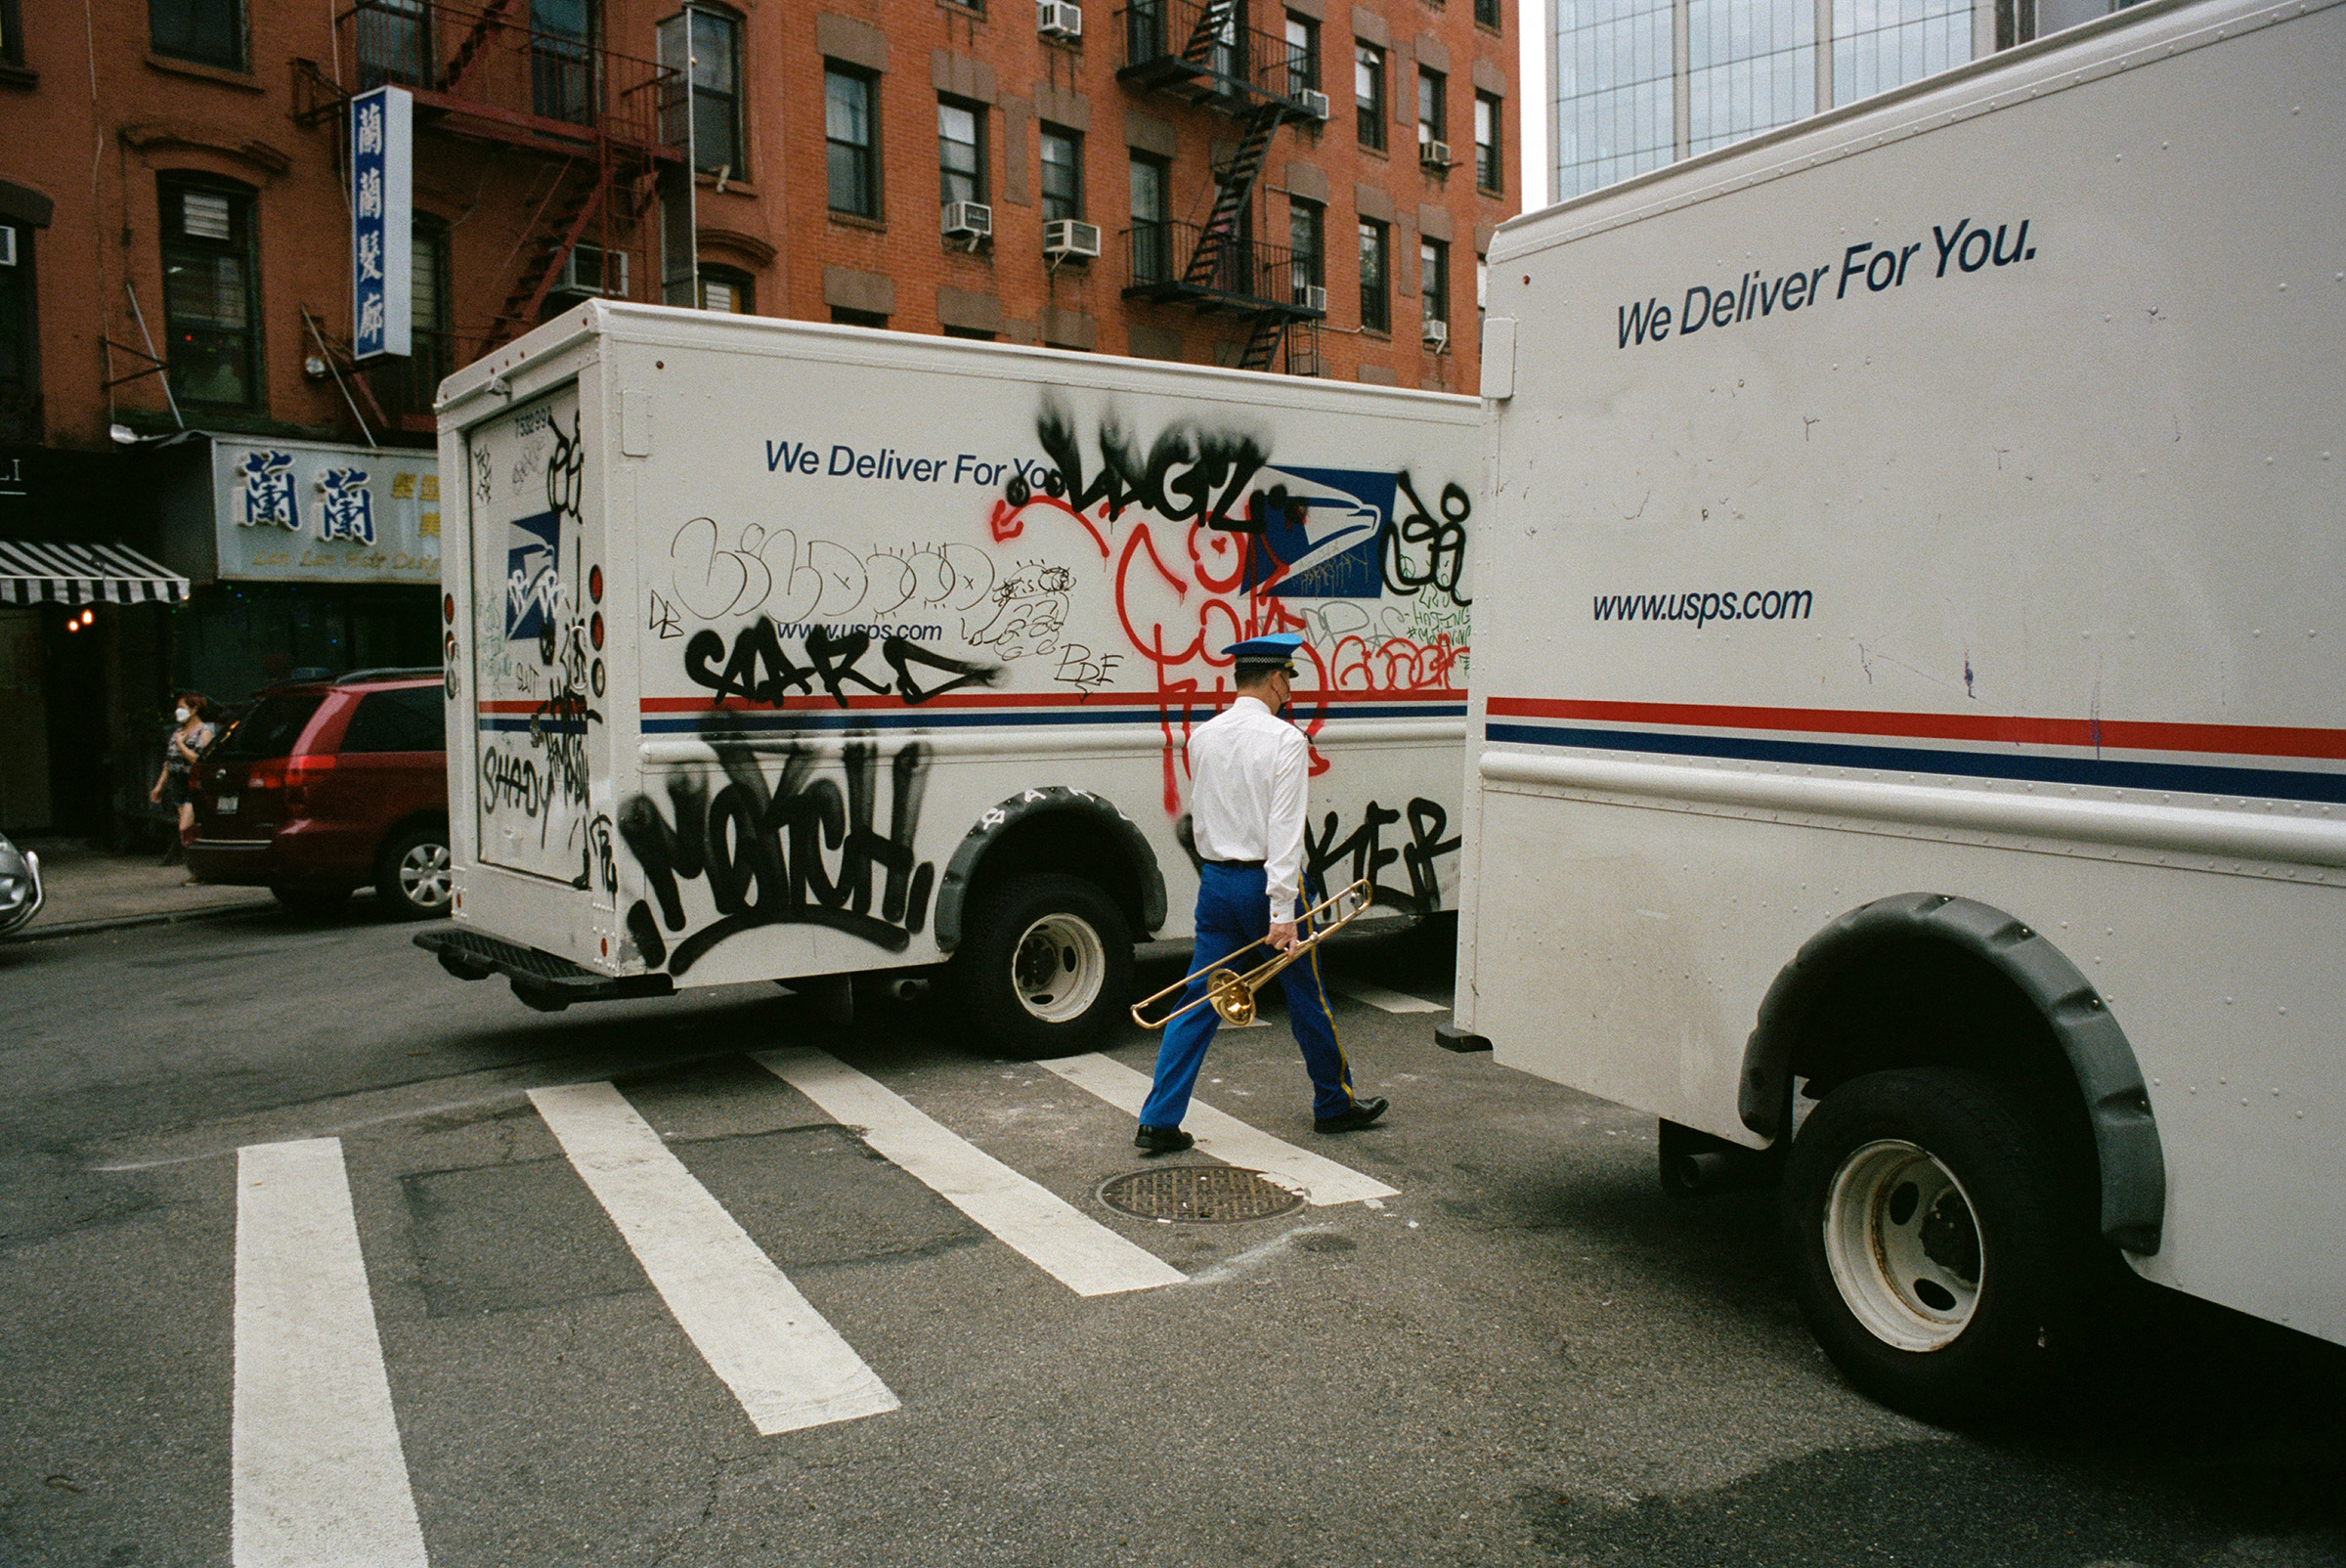 A trombonist from a Chinatown funeral band slips between mail trucks, Sept. 4, 2021. (Daniel Arnold for TIME)